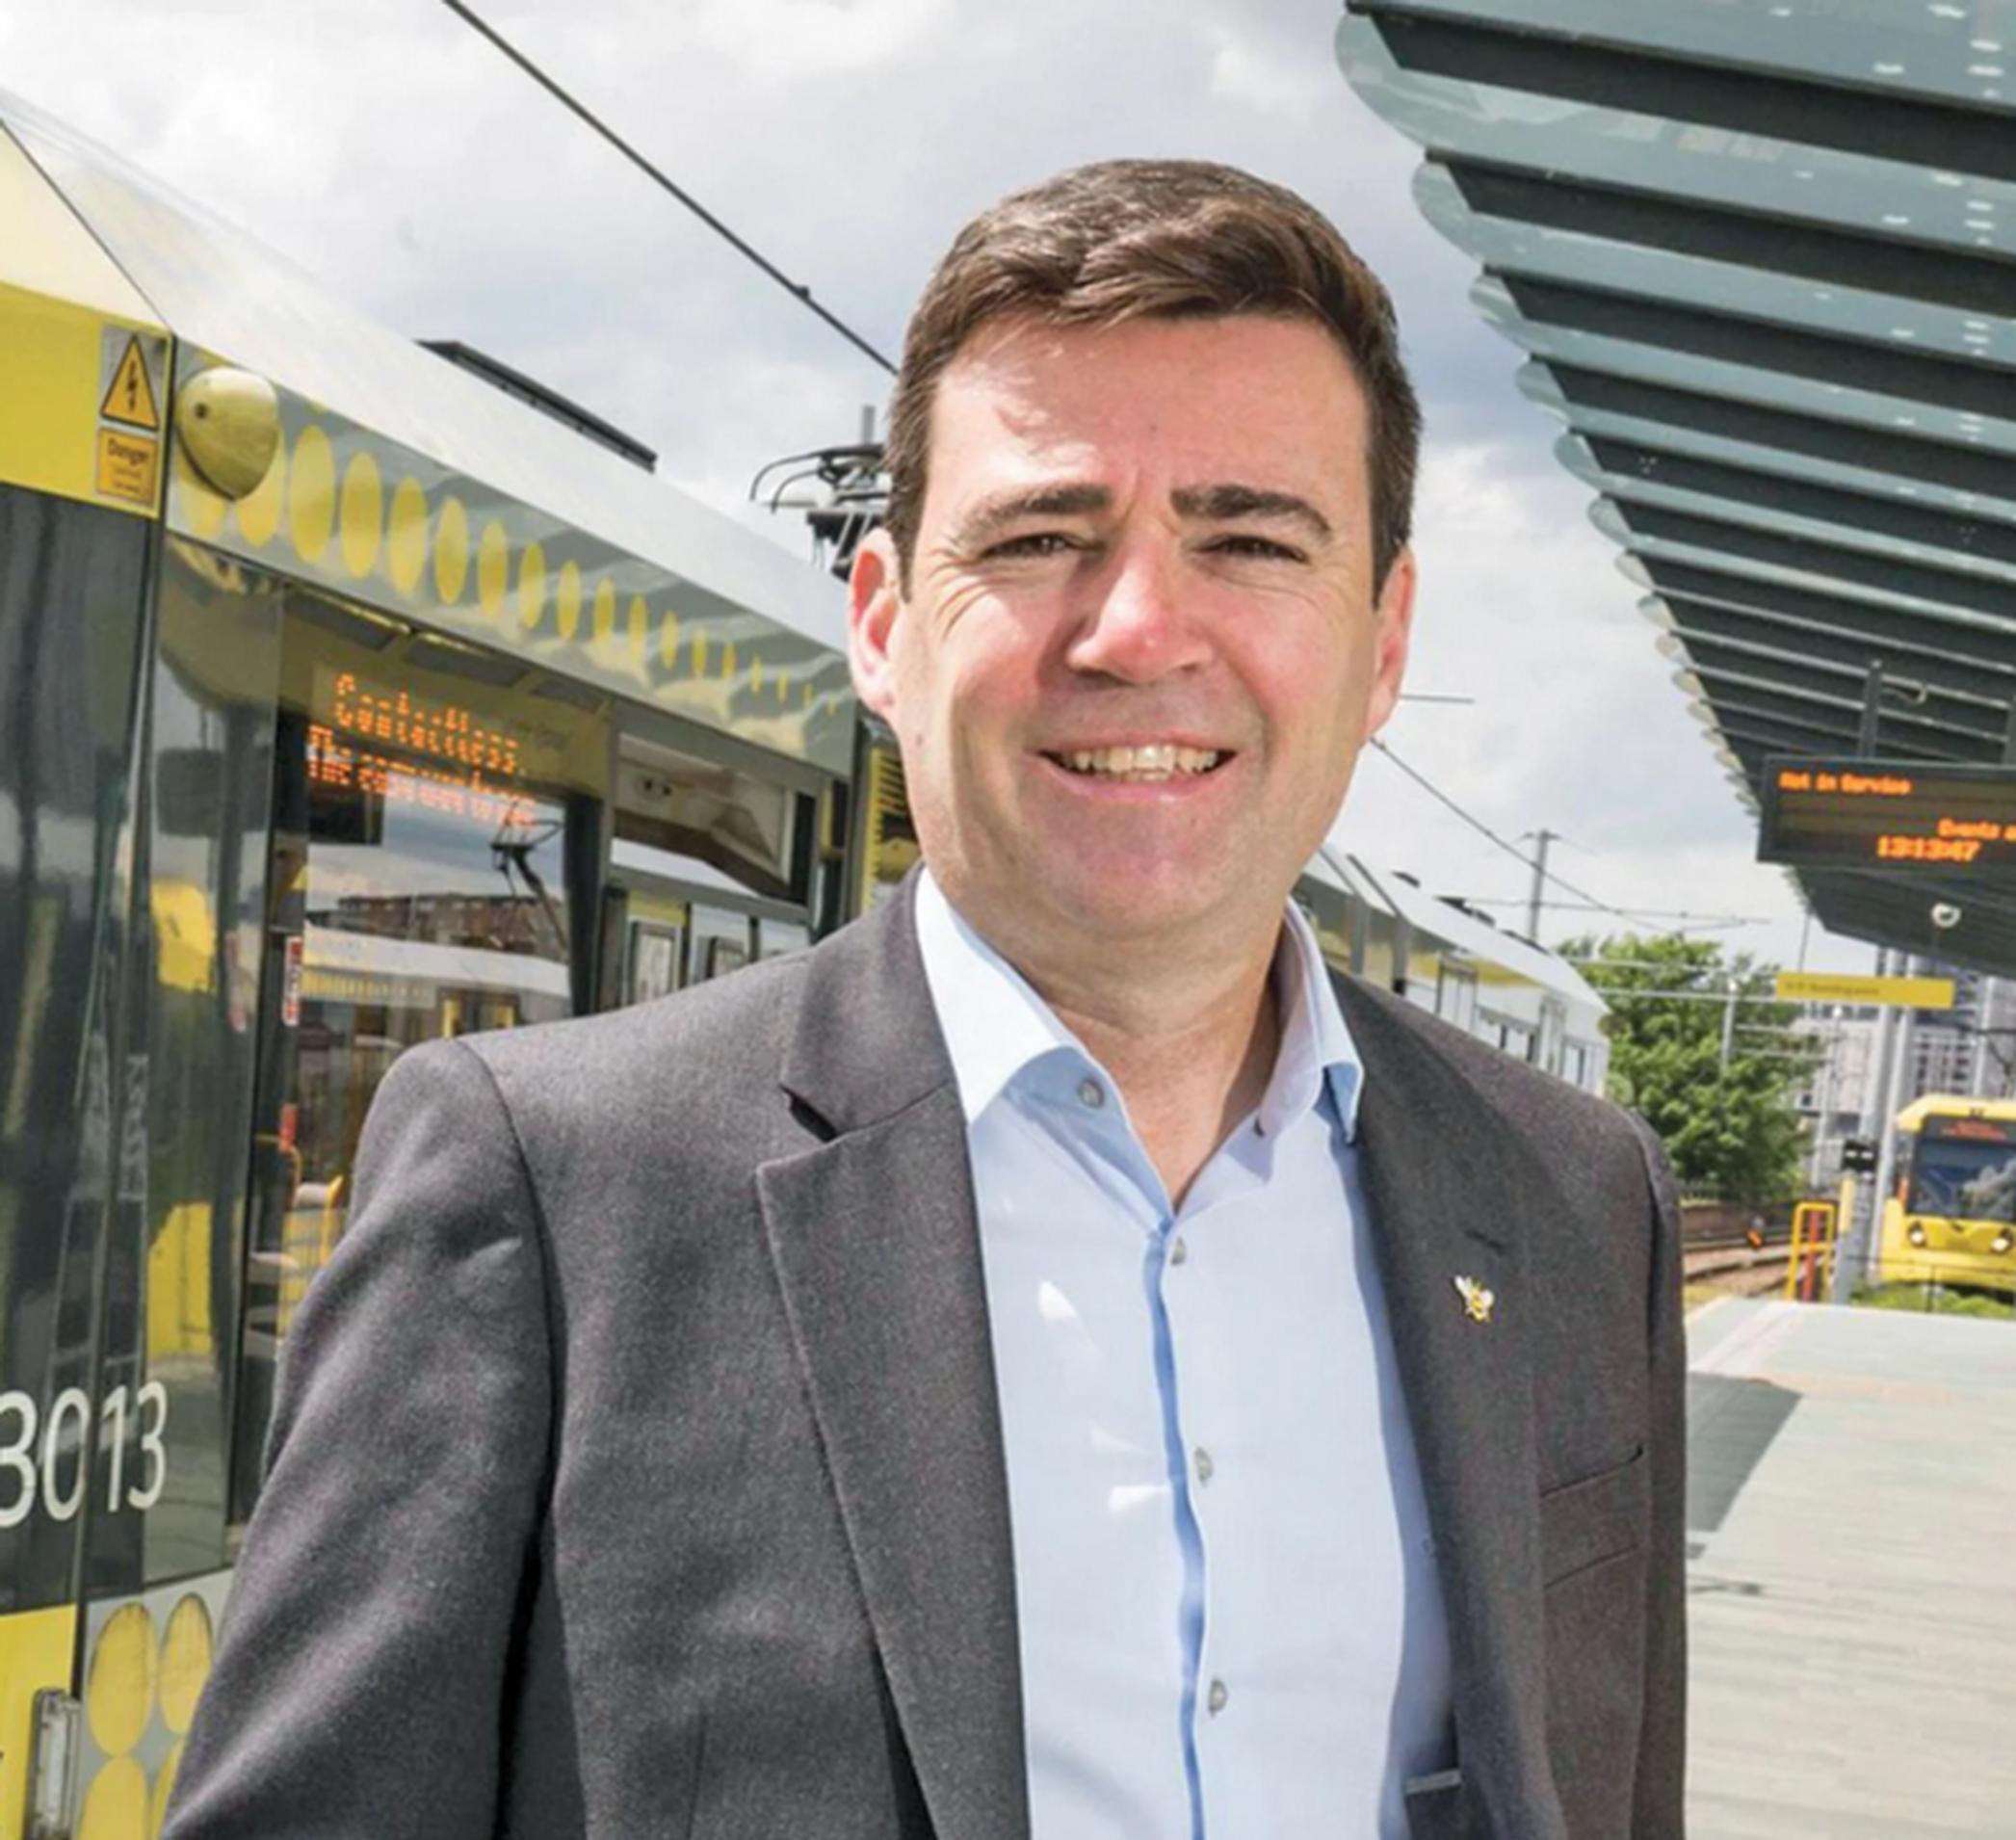 Sceptical: Mayor of Greater Manchester Andy Burnham